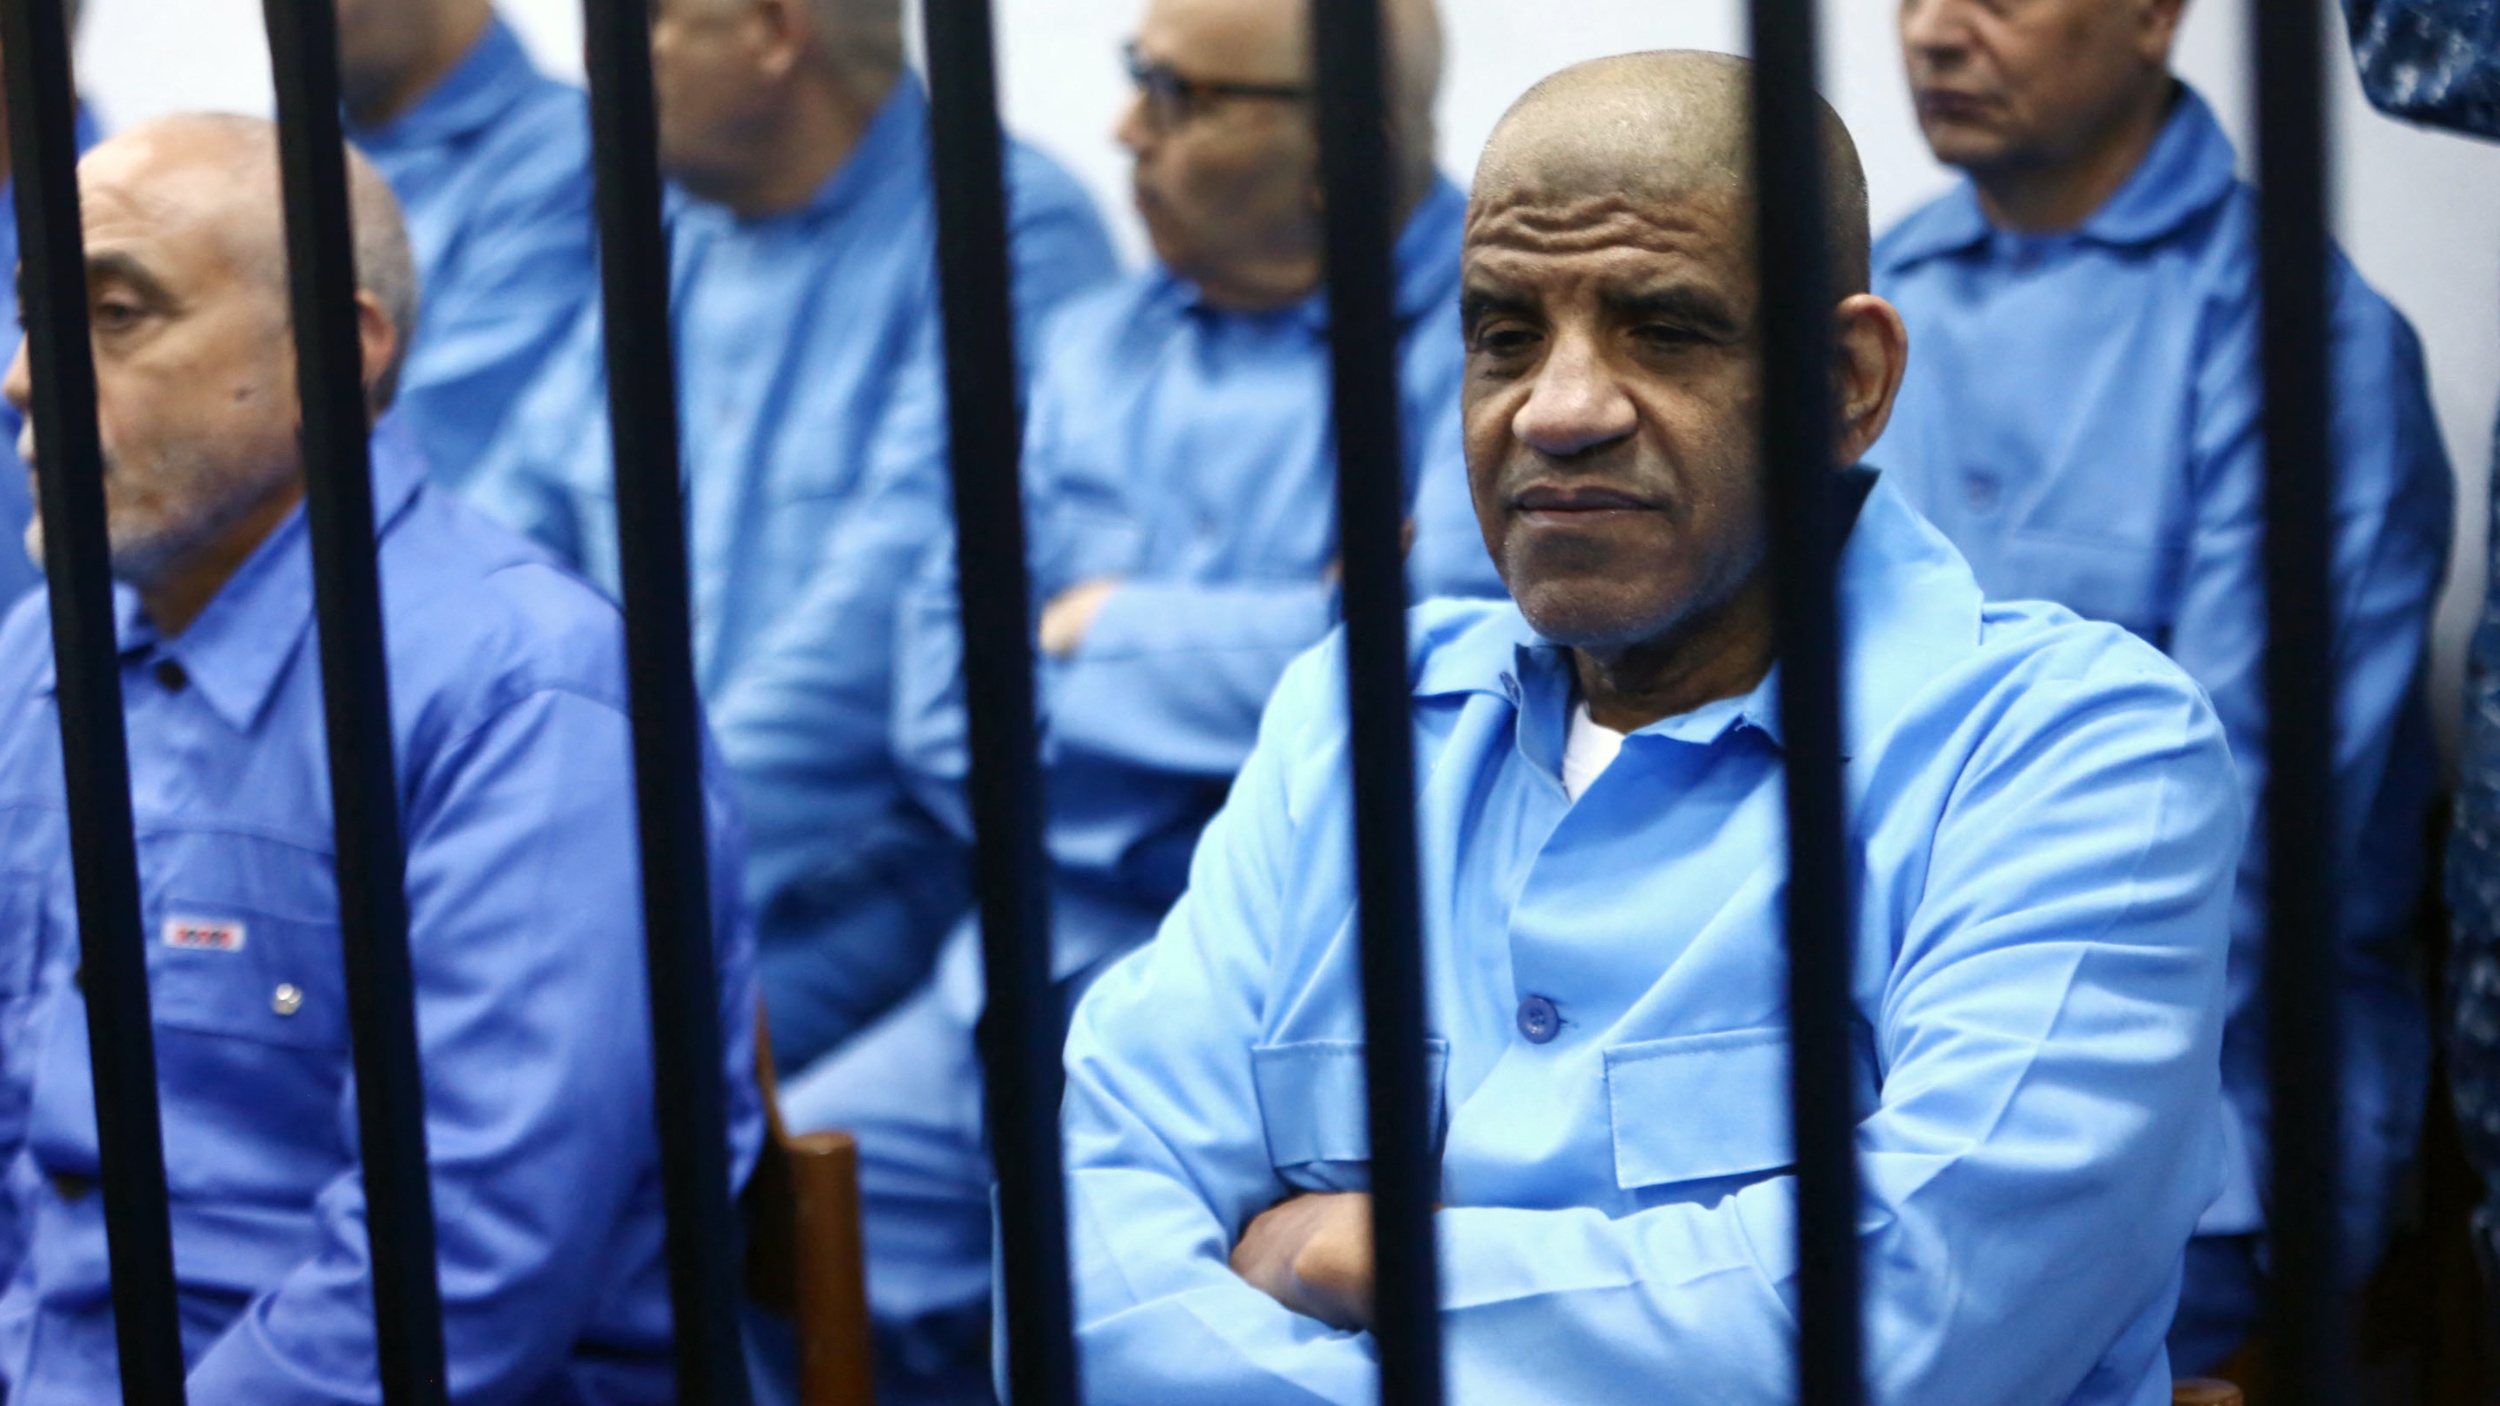 Former Libyan intelligence chief Abdullah al-Senussi (R) sits with other defendants behind the bars during a hearing on 22 February 2015 in a courthouse in Tripoli (AFP)